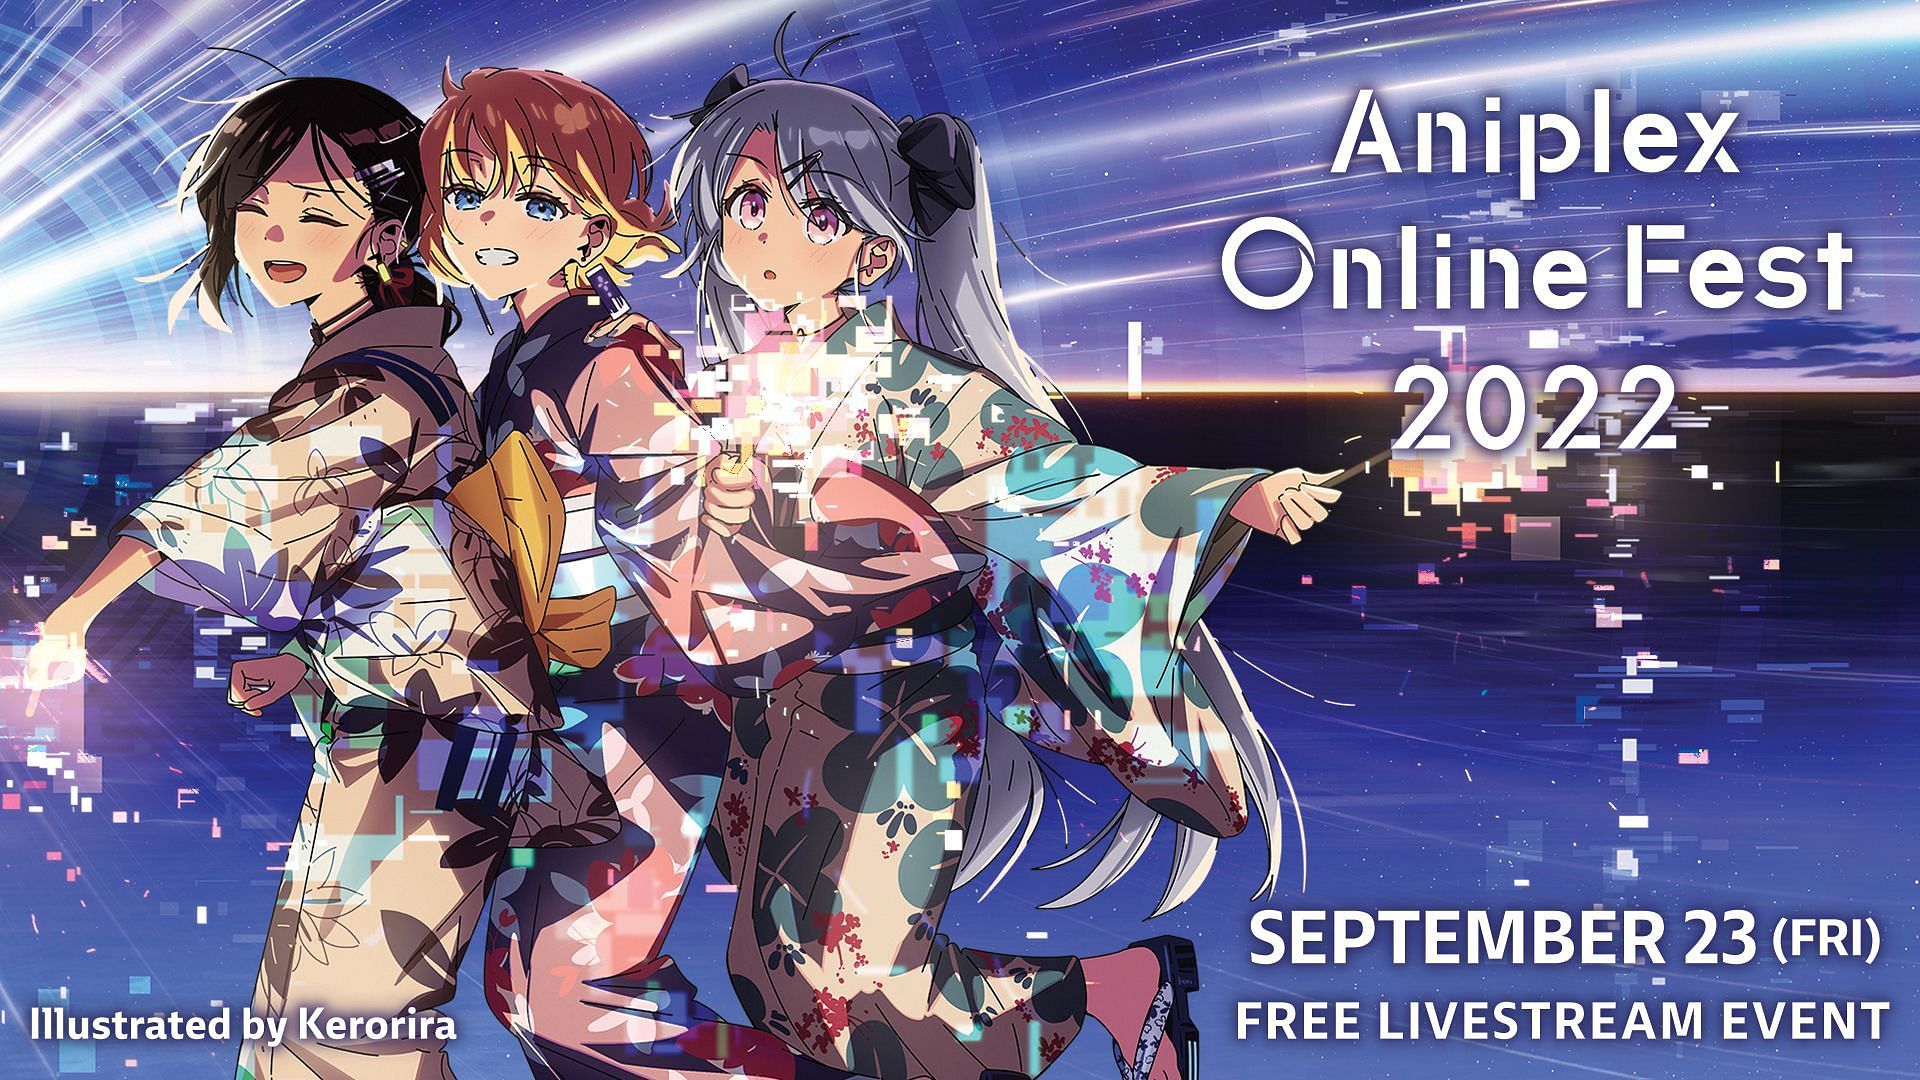 Aniplex Online Fest 2022 Every Anime Announcement From the Event